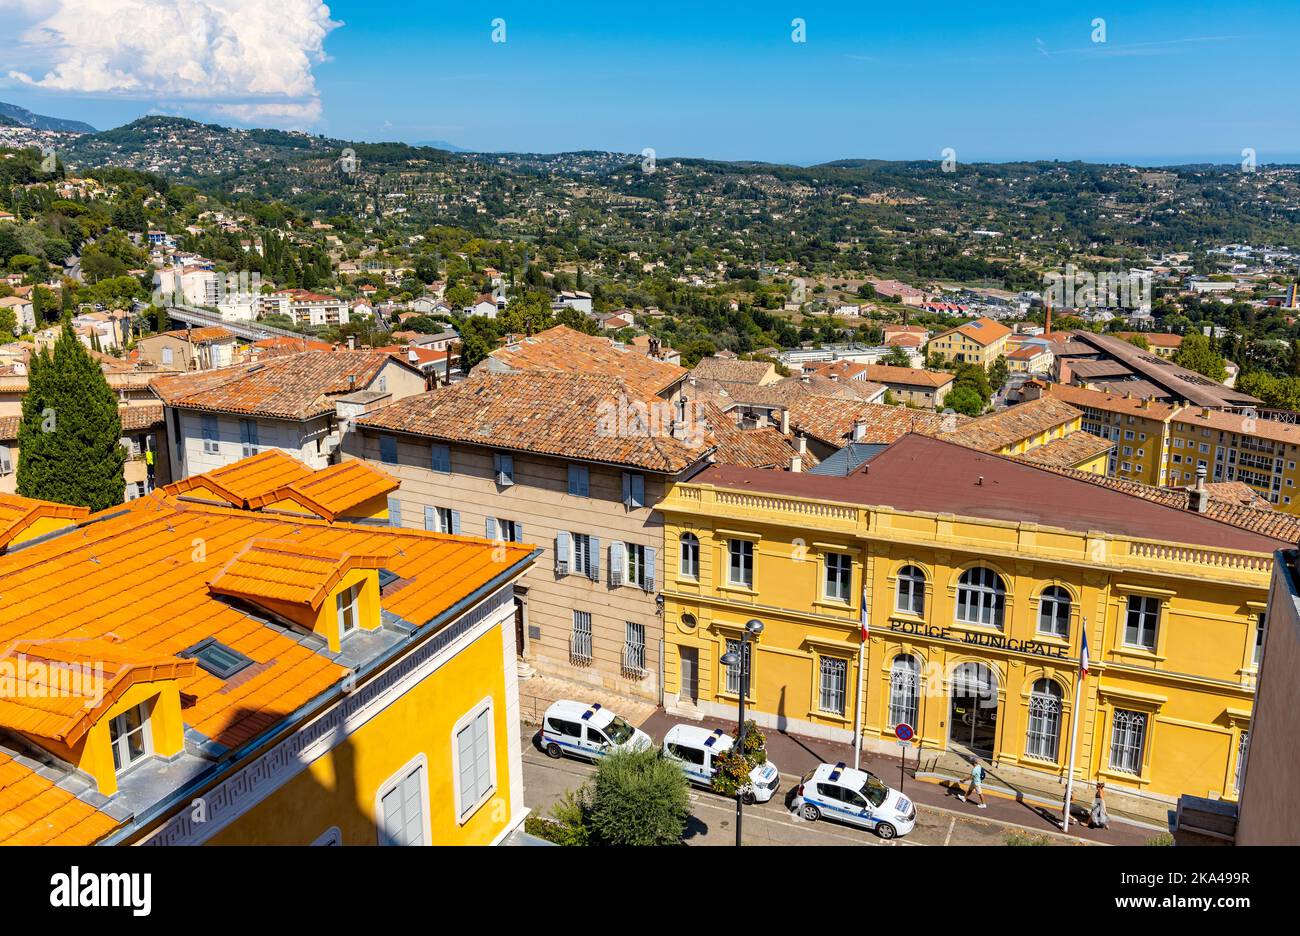 Grasse France August 6 2022 Panoramic View Of Eastern Slope Of Lower City And Coast Cote Dazur Alps Mountains Seen From Old Town Quarter 2KA499R 